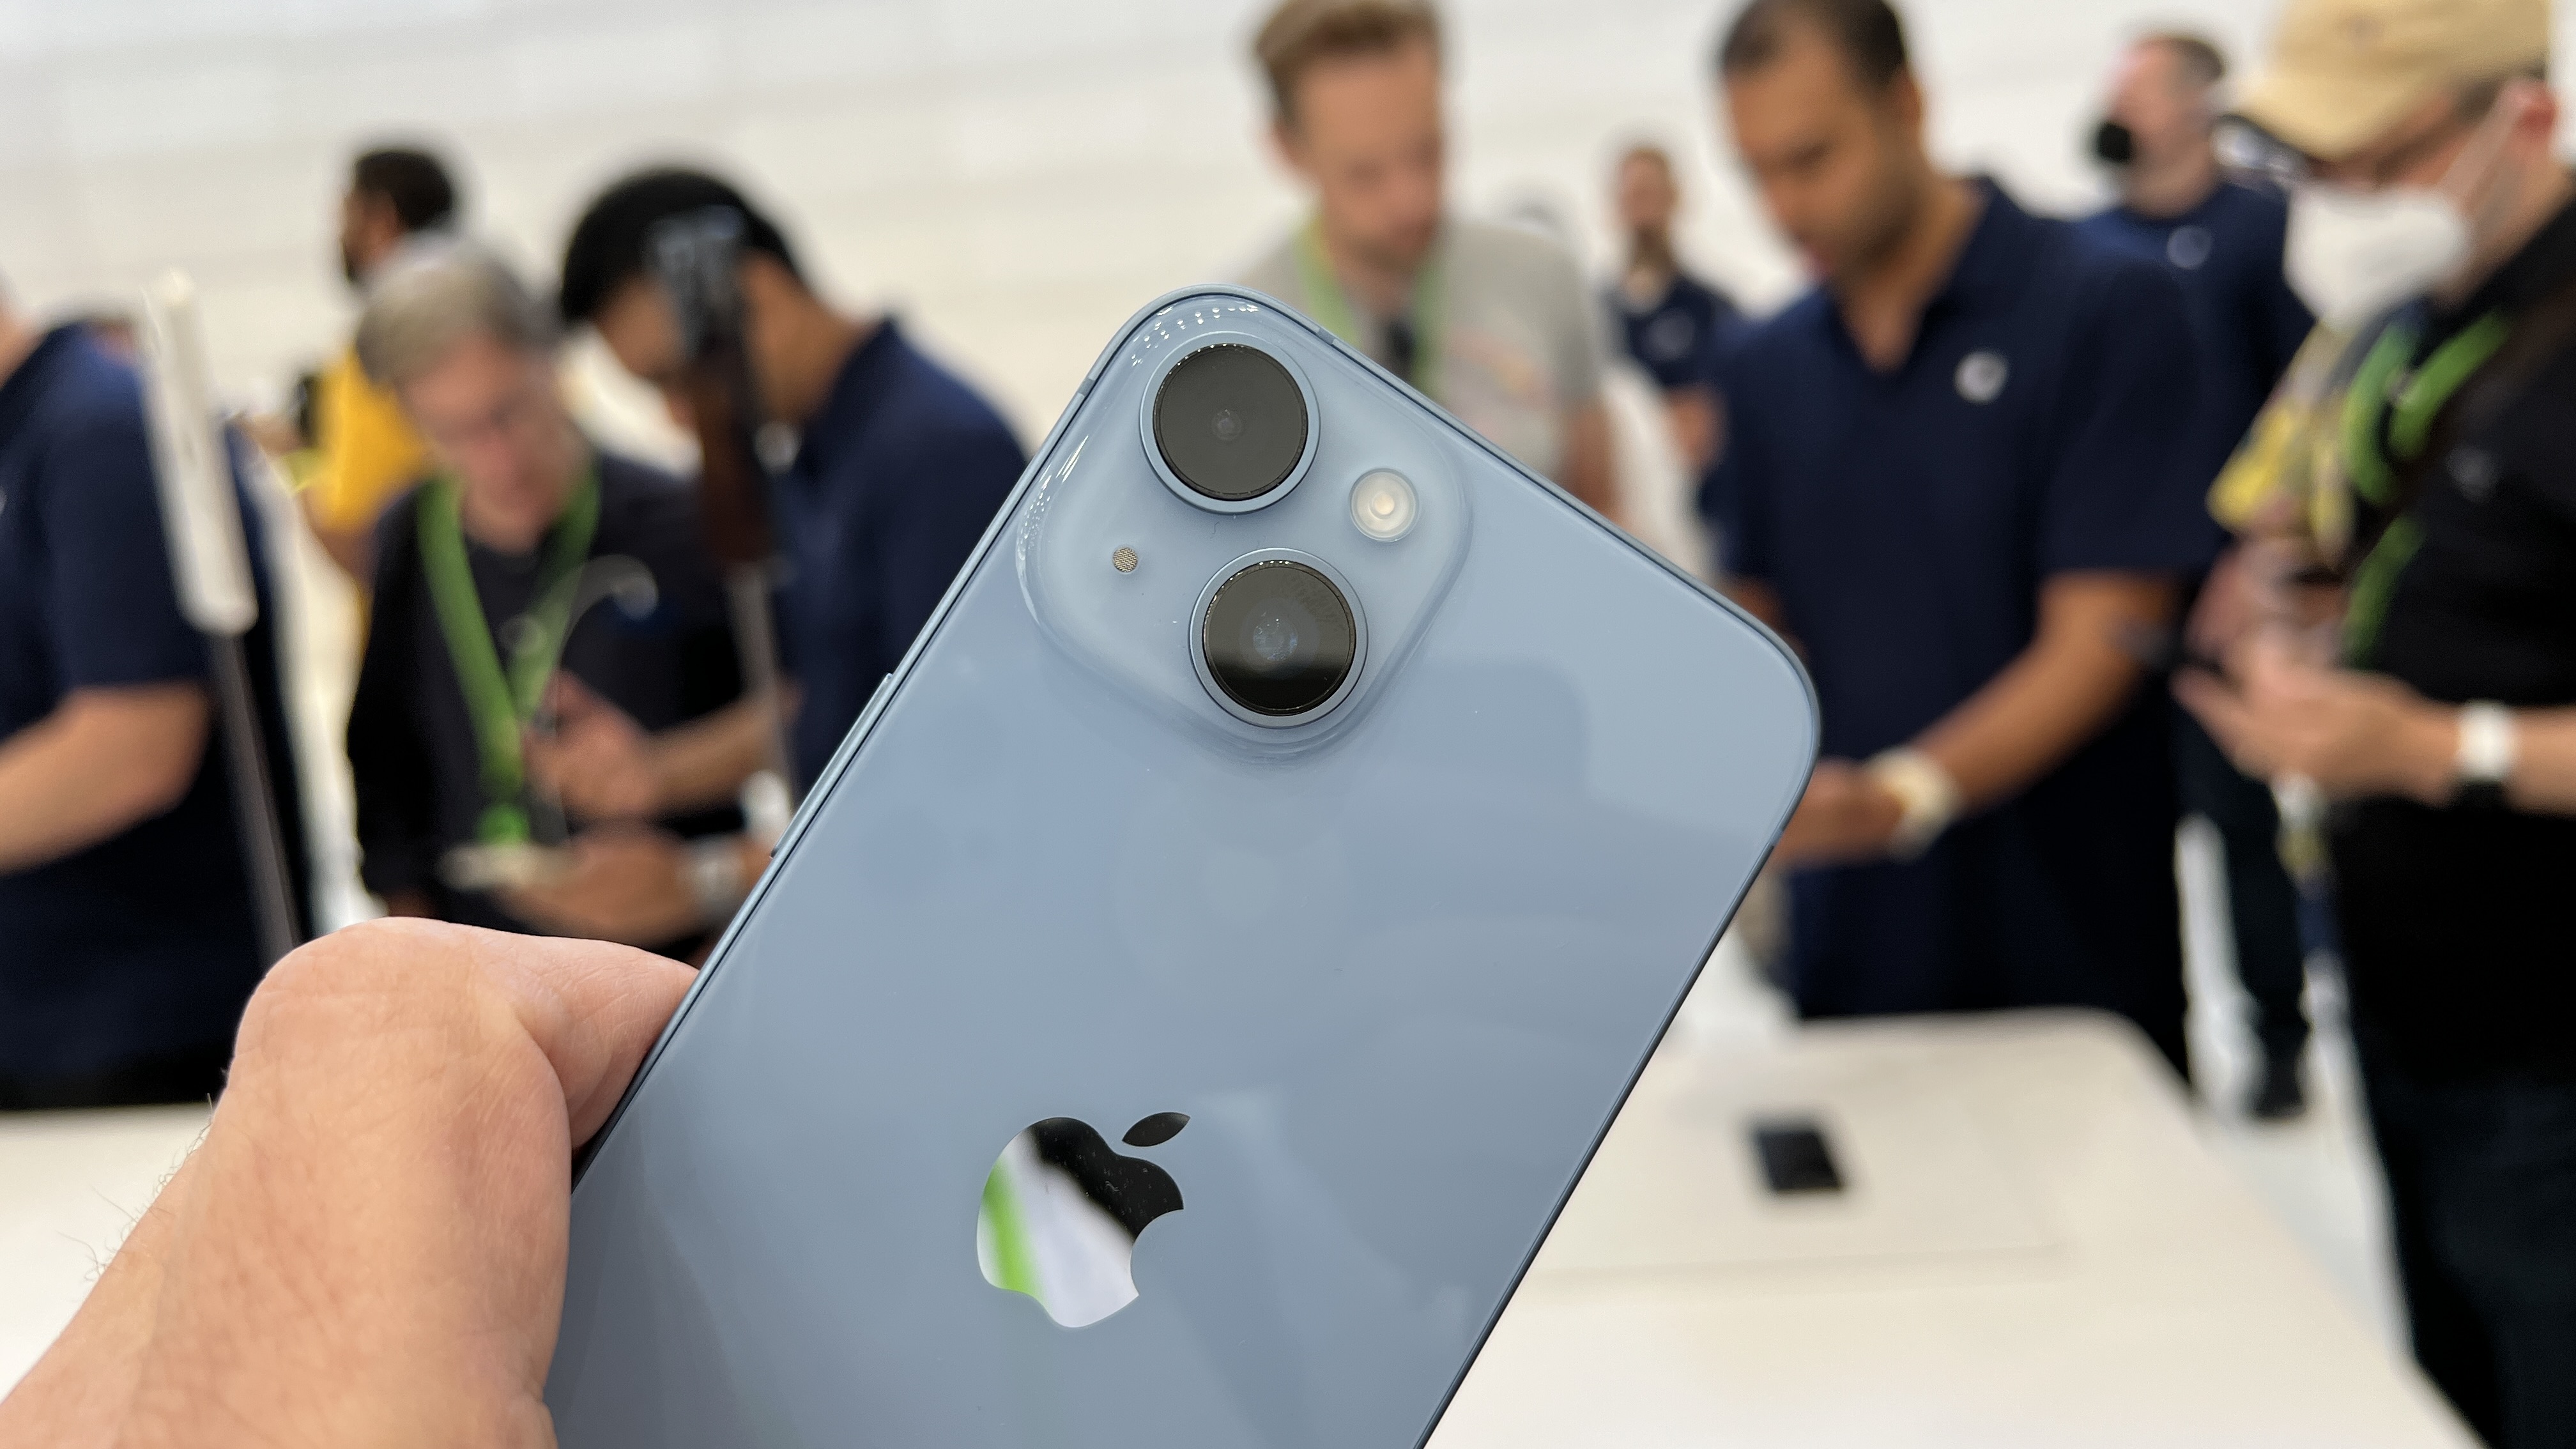 iPhone 14 Pro's camera bump will be even bigger, rumours suggest